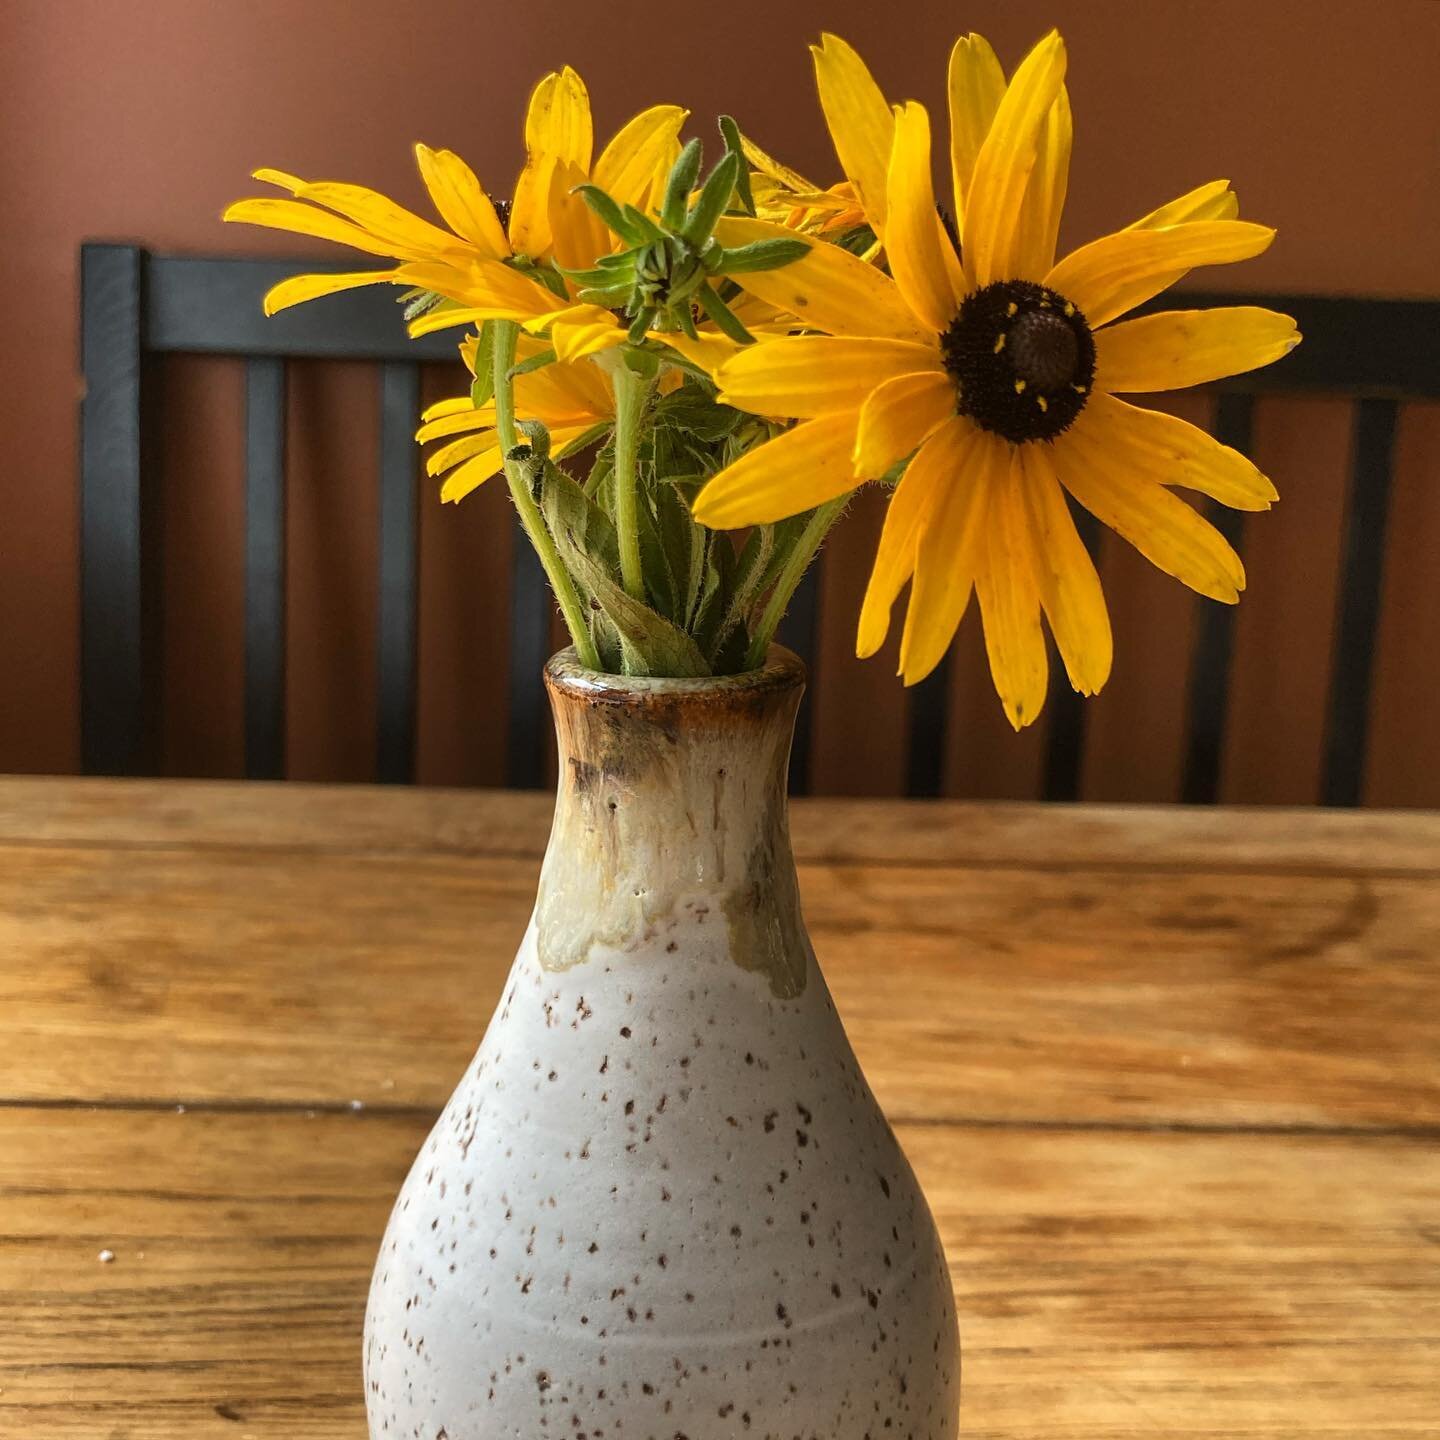 Sweet small vases will be added to my website (see link in my bio) this weekend! Our Black-eyed Susan&rsquo;s were amazing this summer!
#Mahpottery #chattanooga #nooga #ceramics #pottery #womensupportingwomen #localbusiness #design #vase #flowers